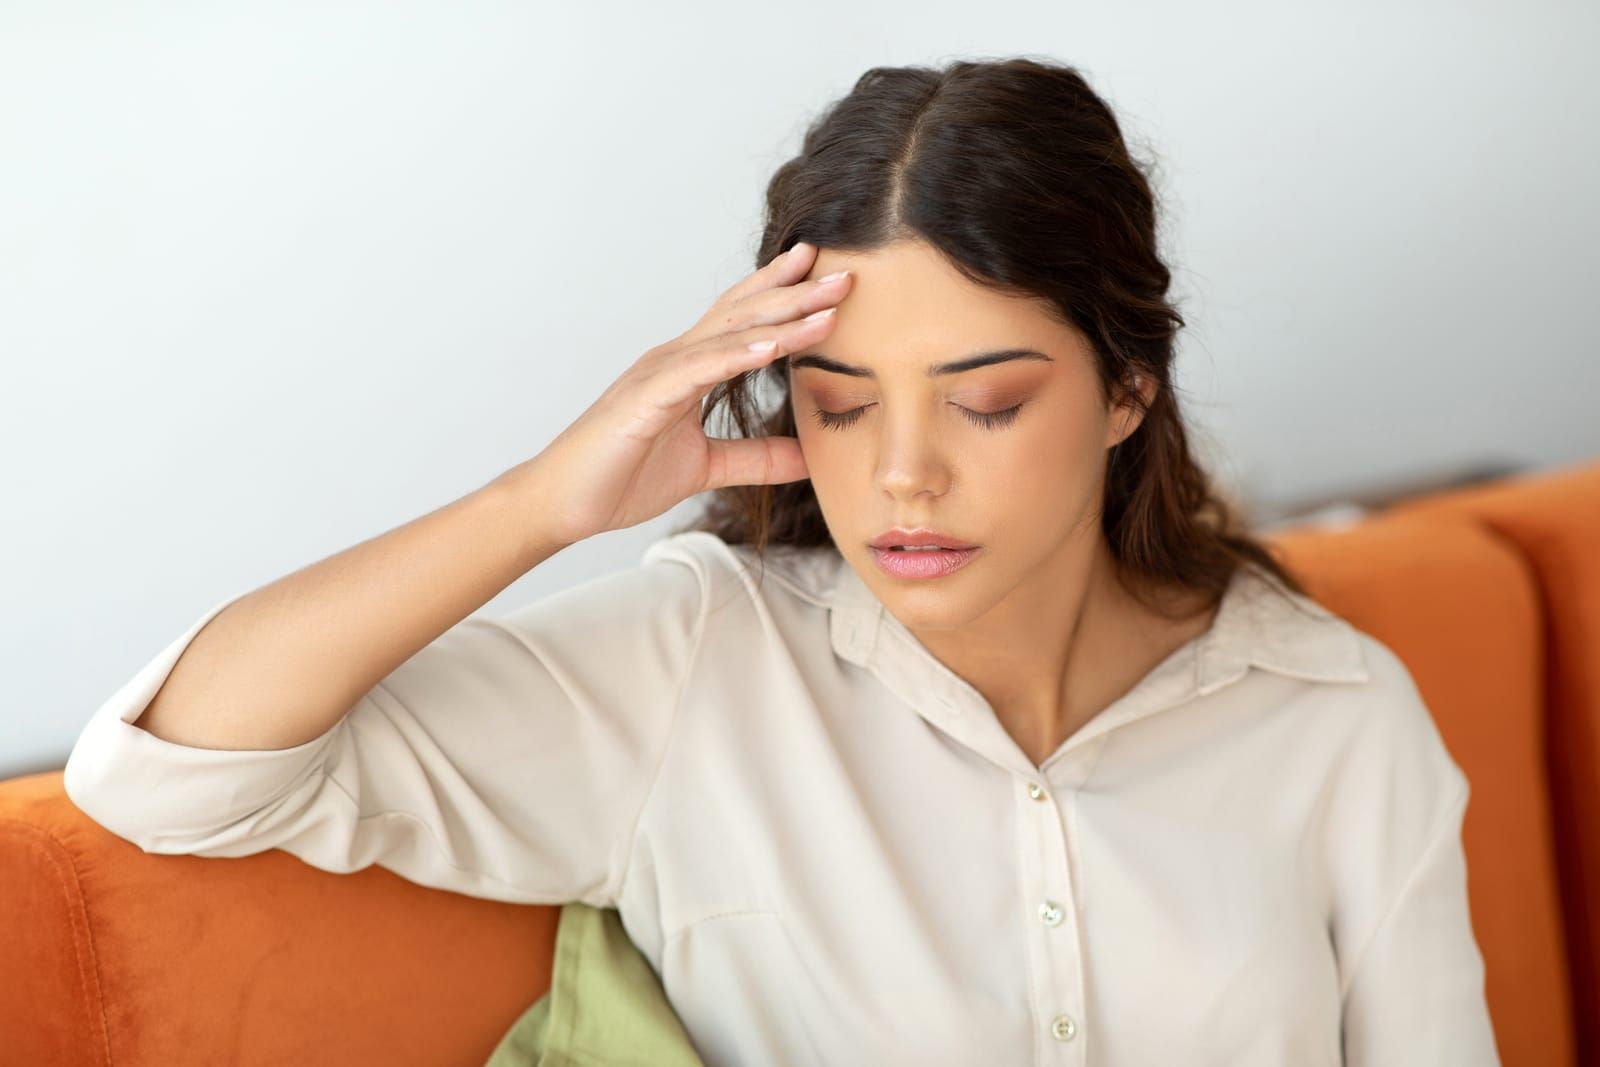 A woman suffering from a headache is sitting on a couch with her hand on her forehead.